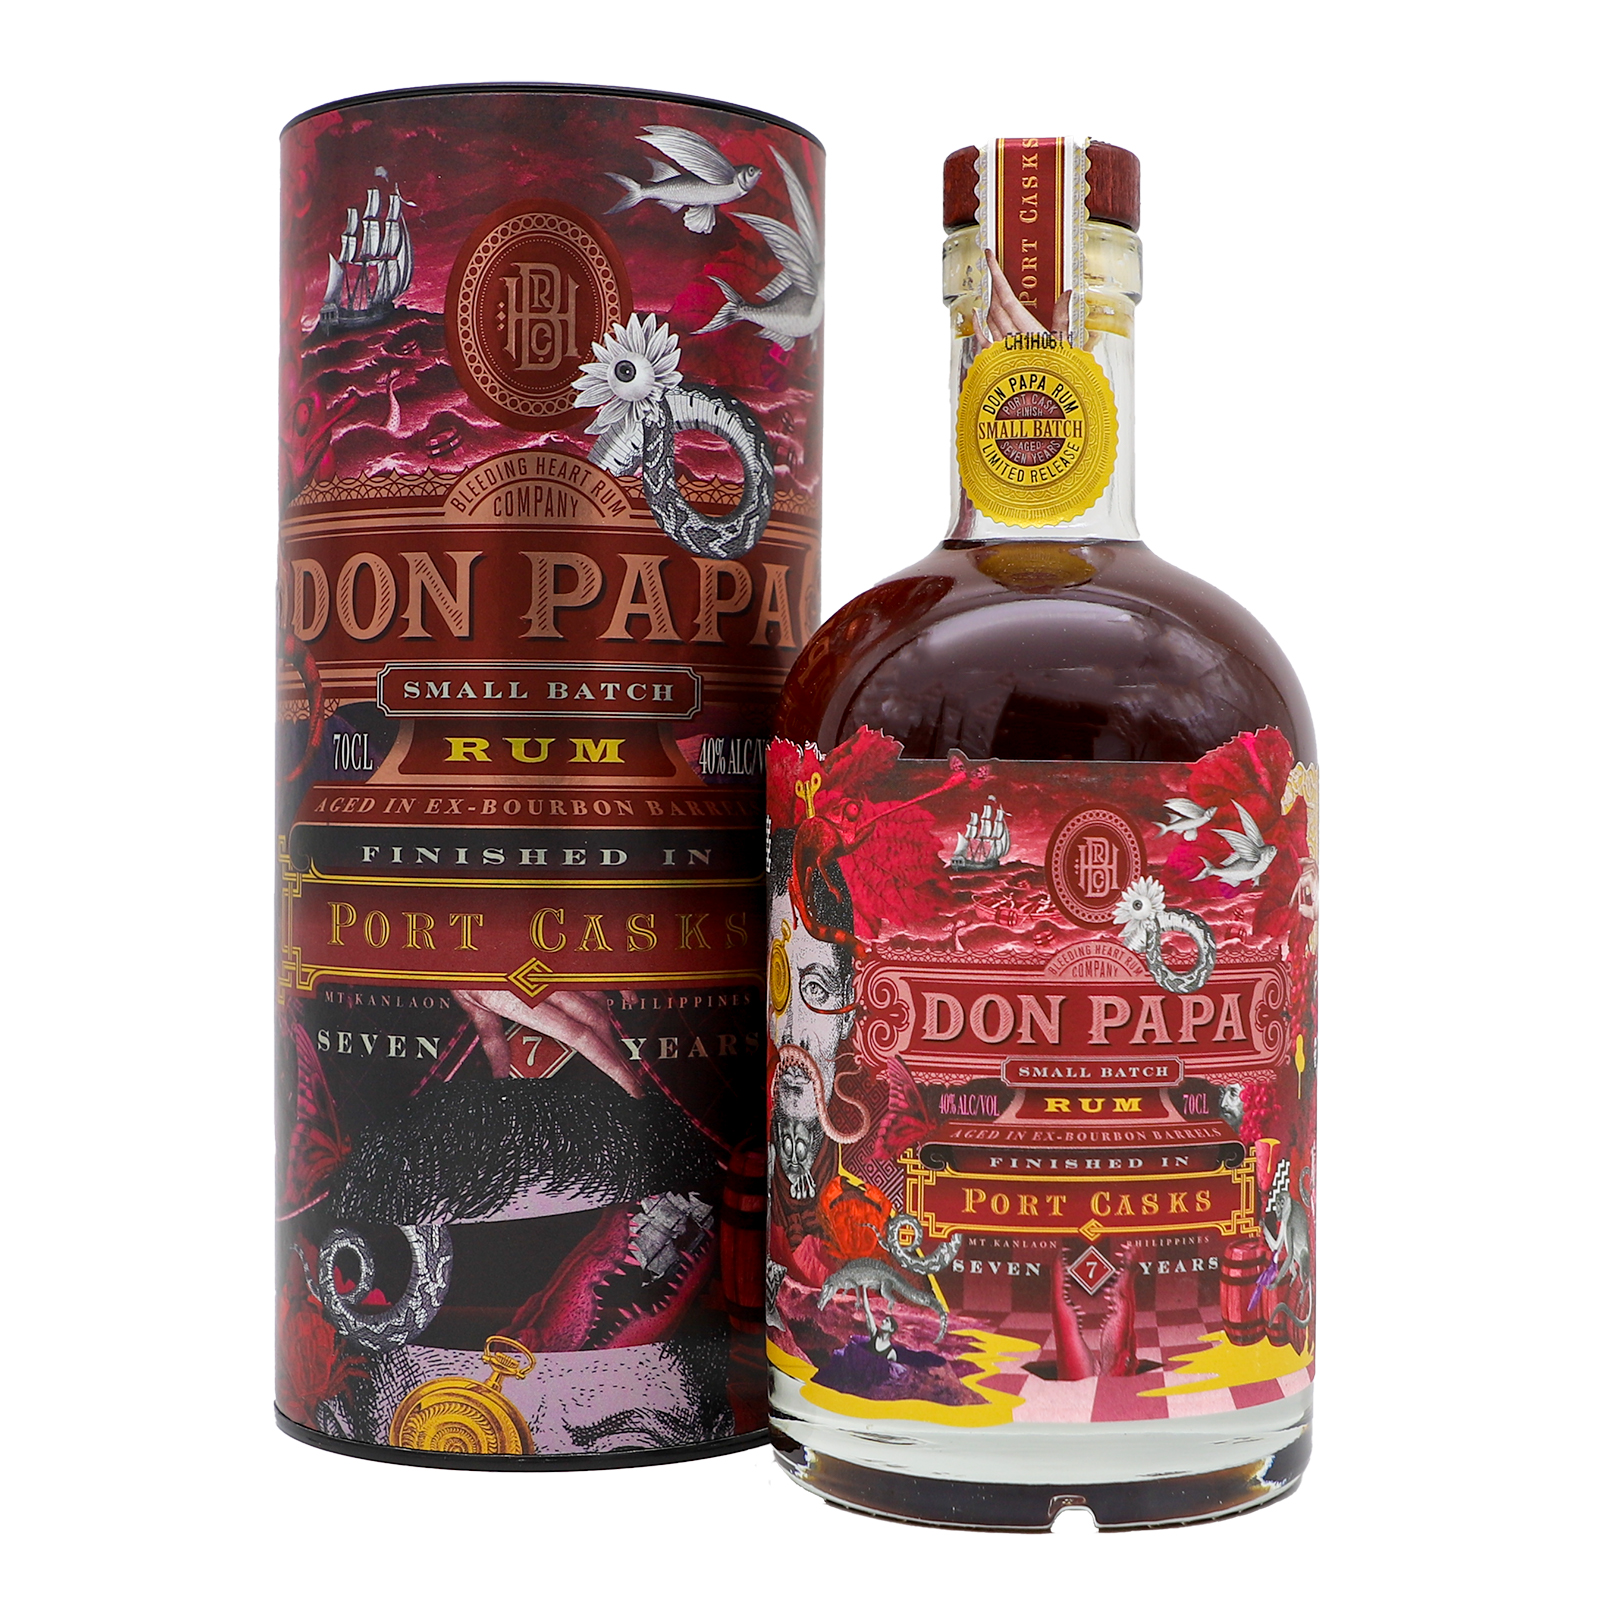 Don Papa Limited Edition 7 Year Port Cask Aged Rum 700ml